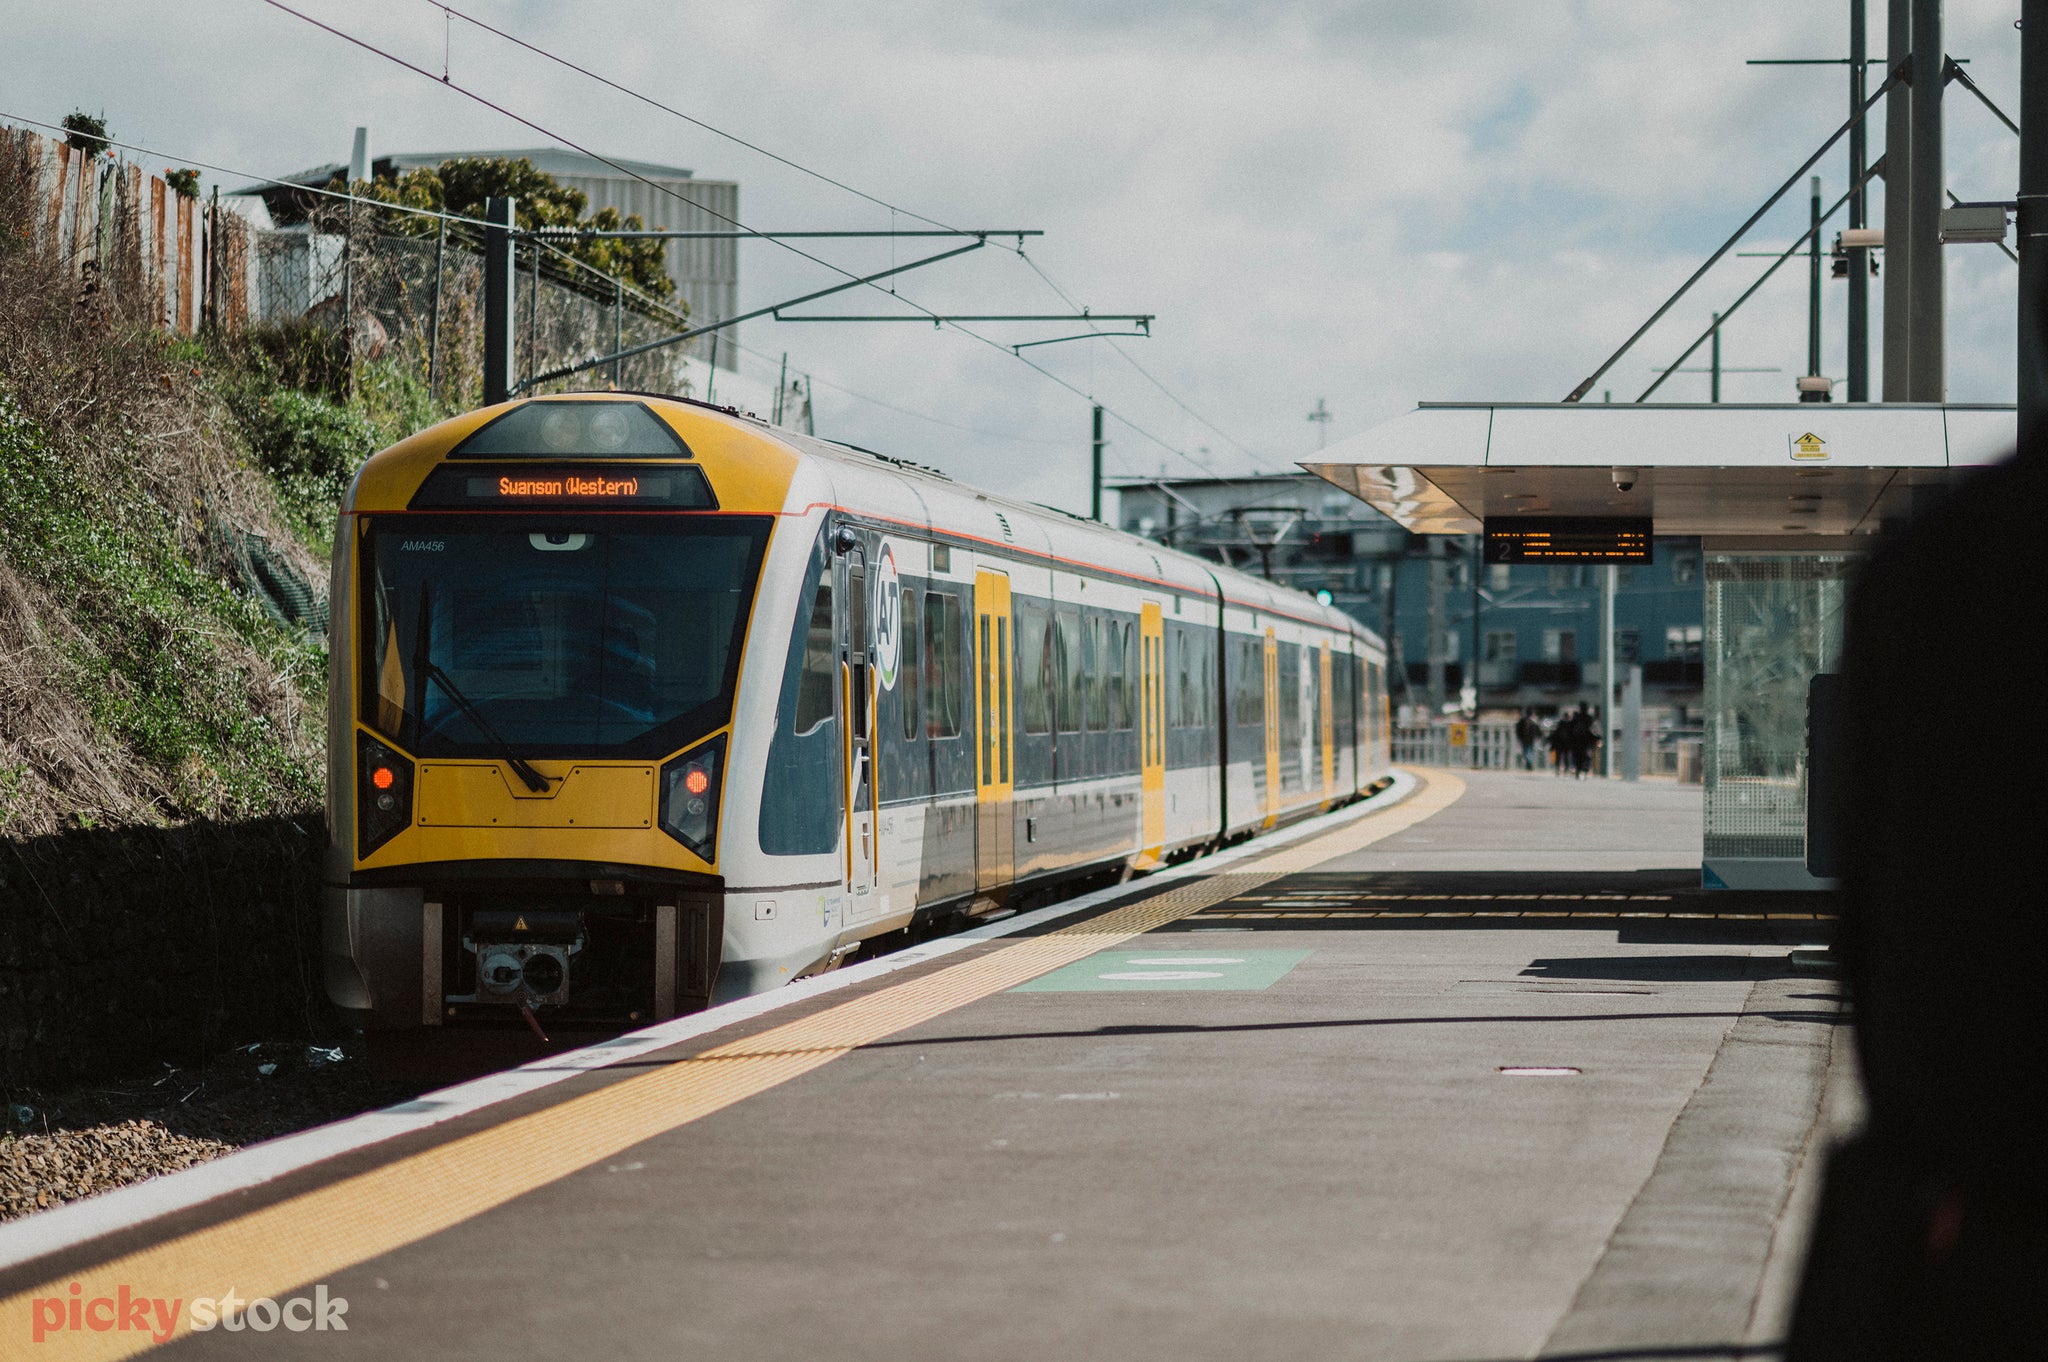 A grey and yellow electric train slides into the station at Mount Eden, hard to tell what time of the day. A shadowed but friendly figure stands to the right of frame. 